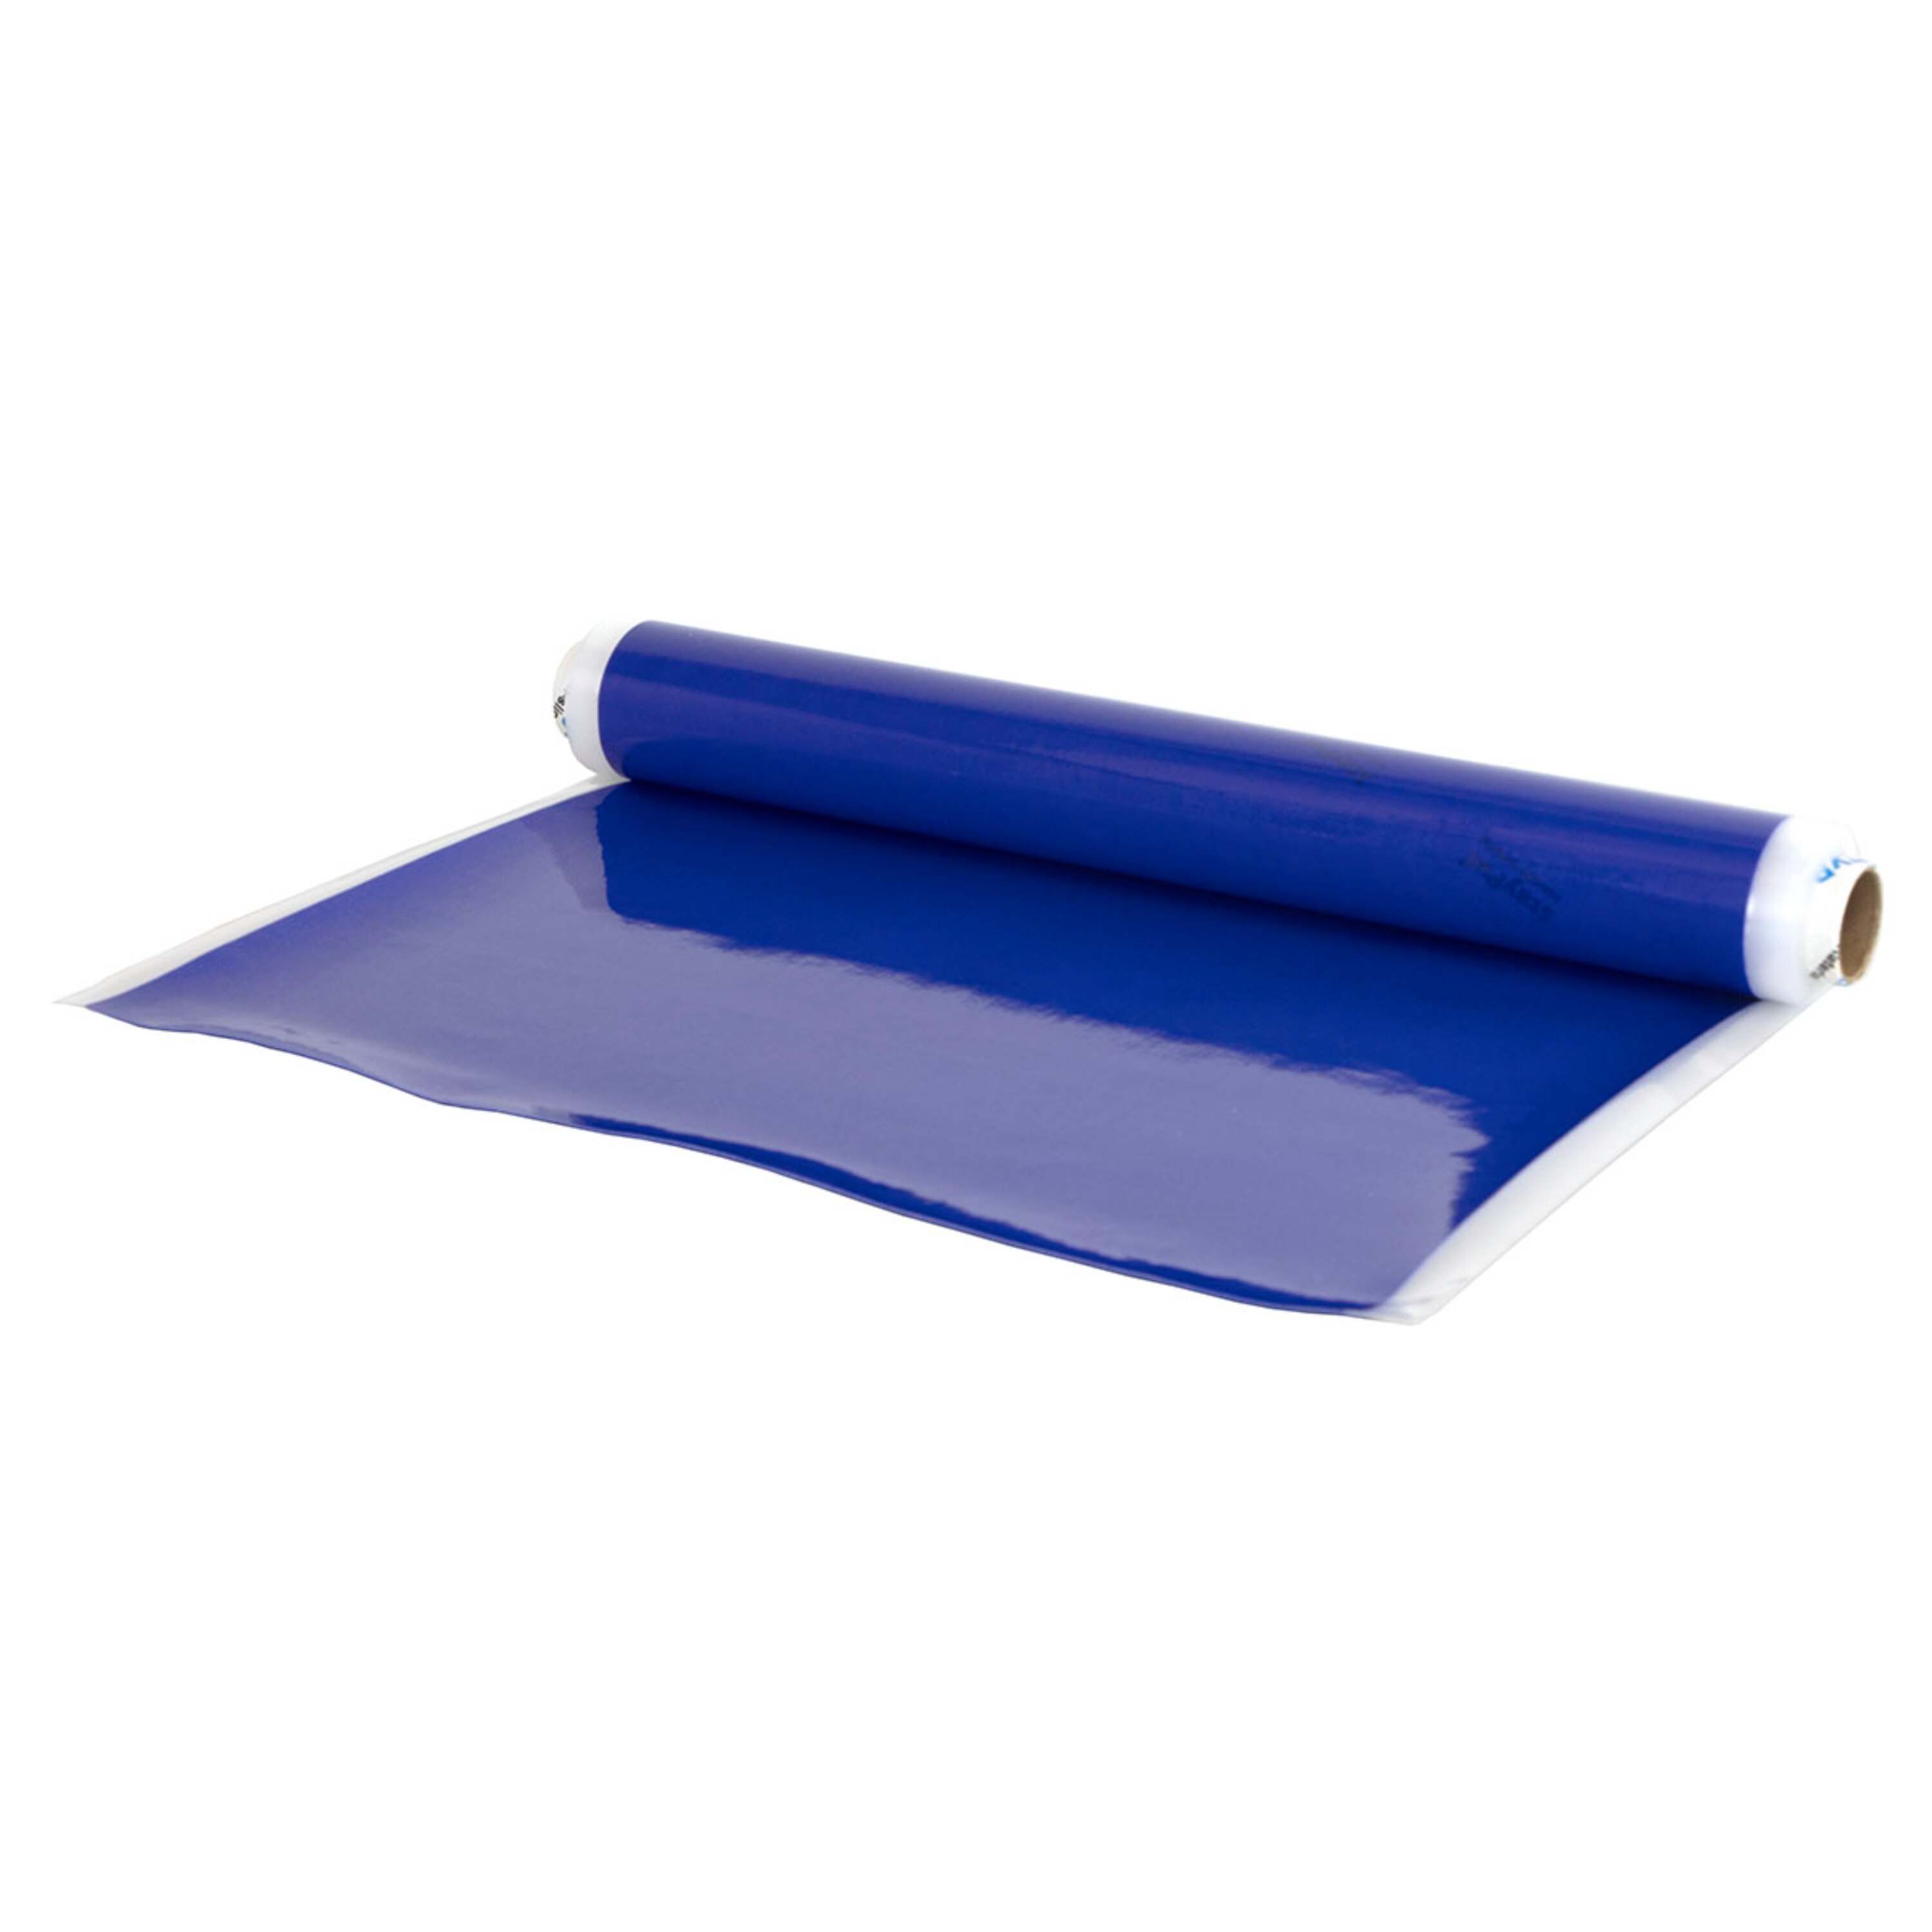 StayPut Non-Slip Material, Blue, 16" x 2 yd